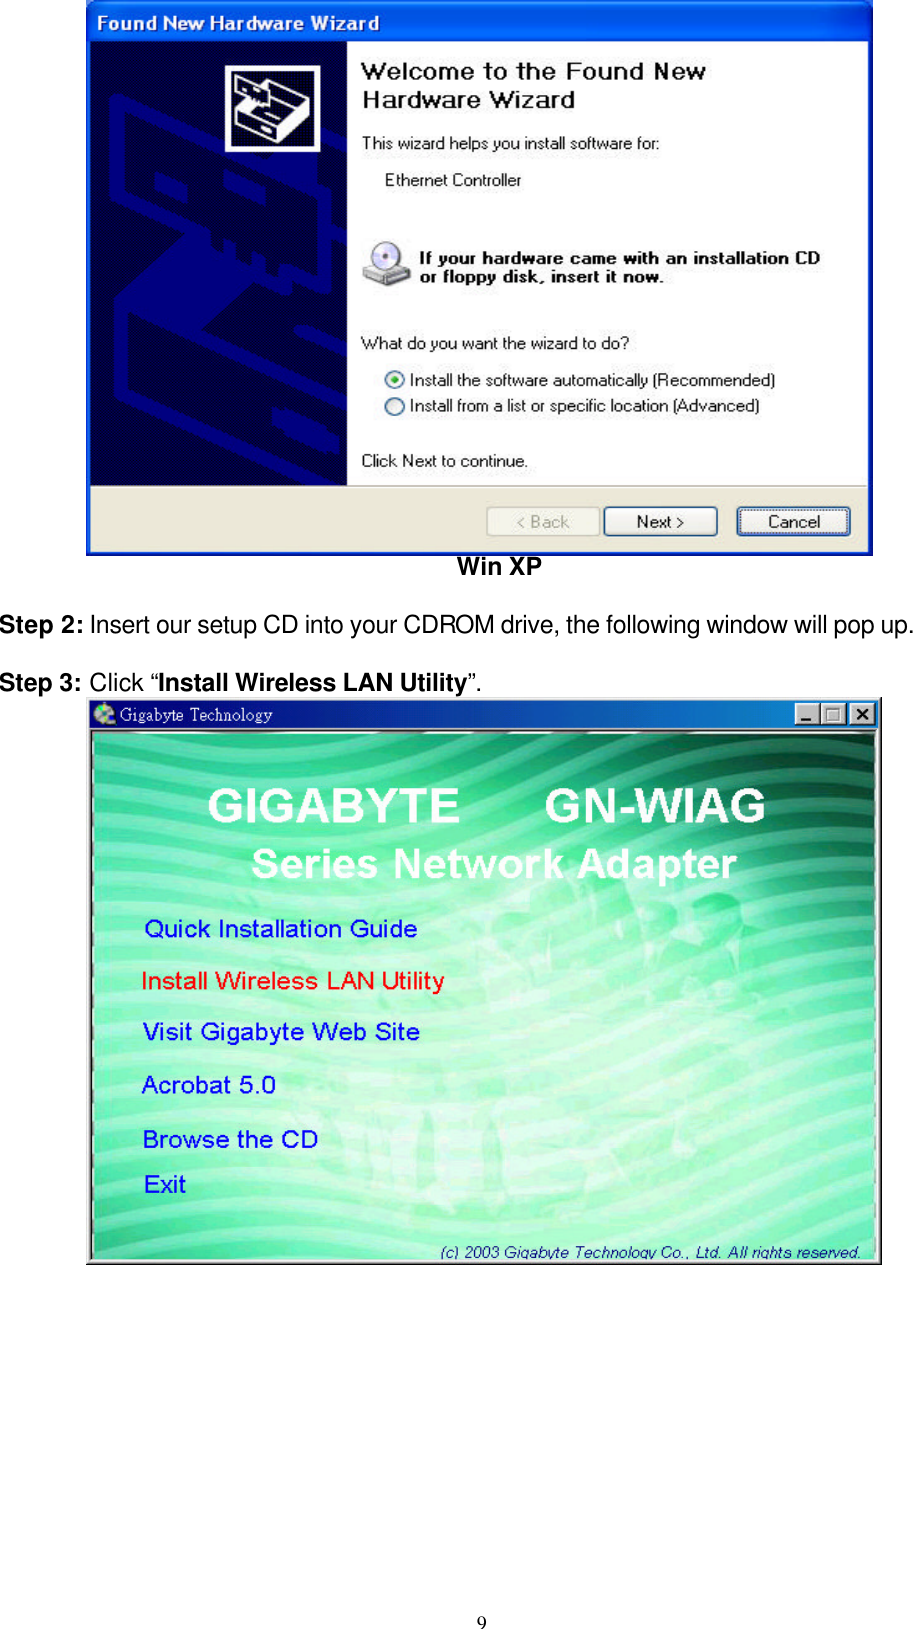 9   Win XP  Step 2: Insert our setup CD into your CDROM drive, the following window will pop up.  Step 3: Click “Install Wireless LAN Utility”.           